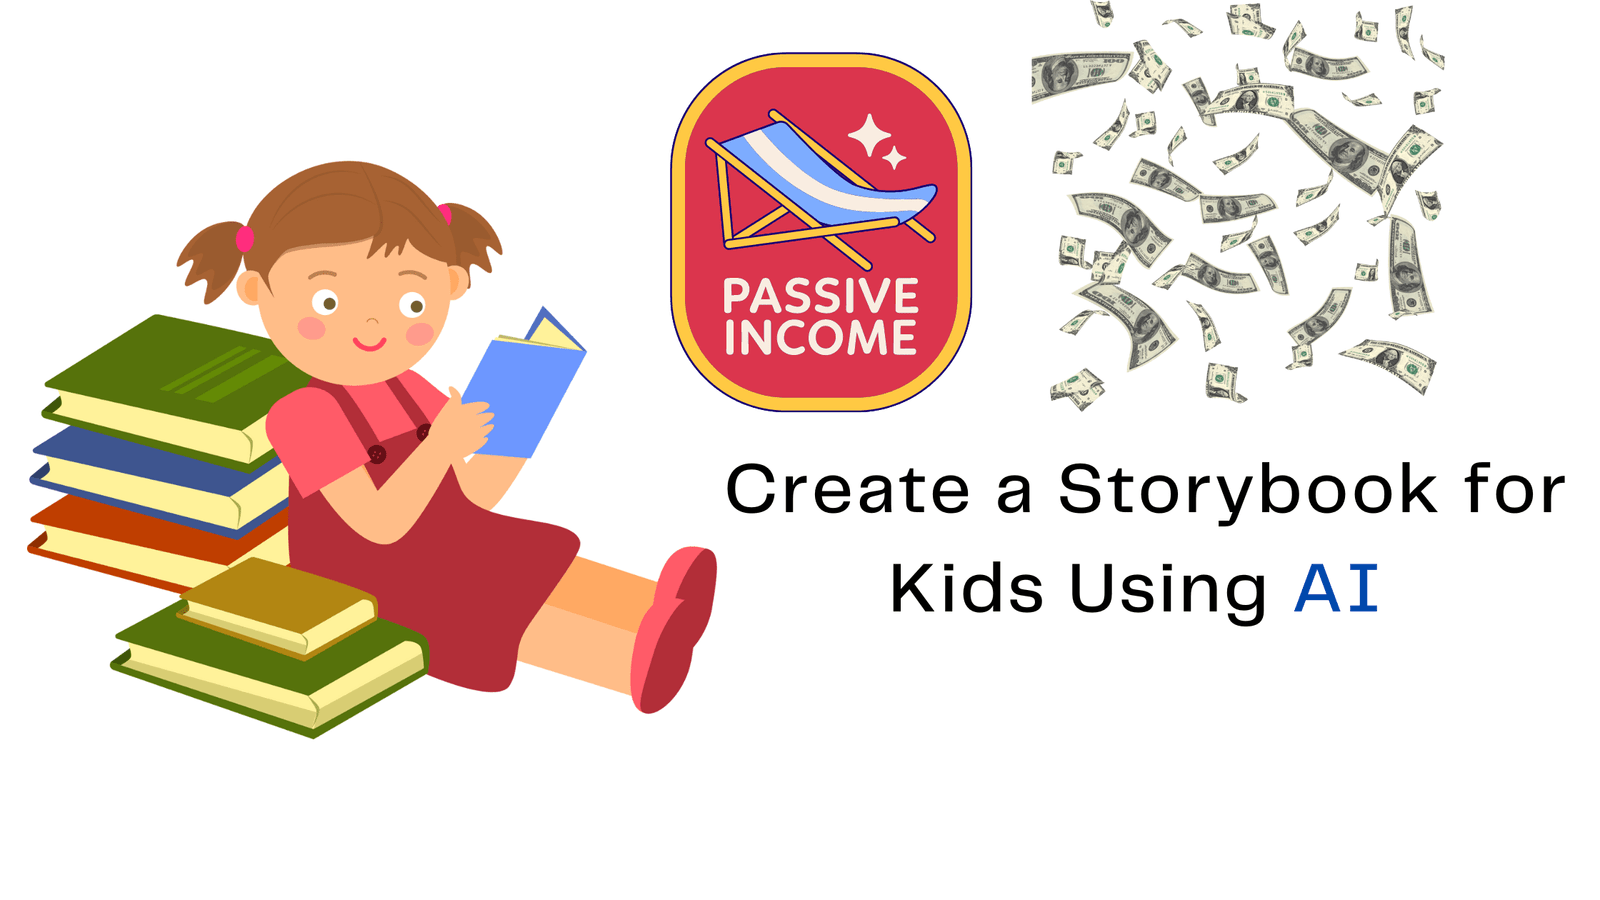 How to Create a Storybook for Kids Using AI Technology and Make Passive Income